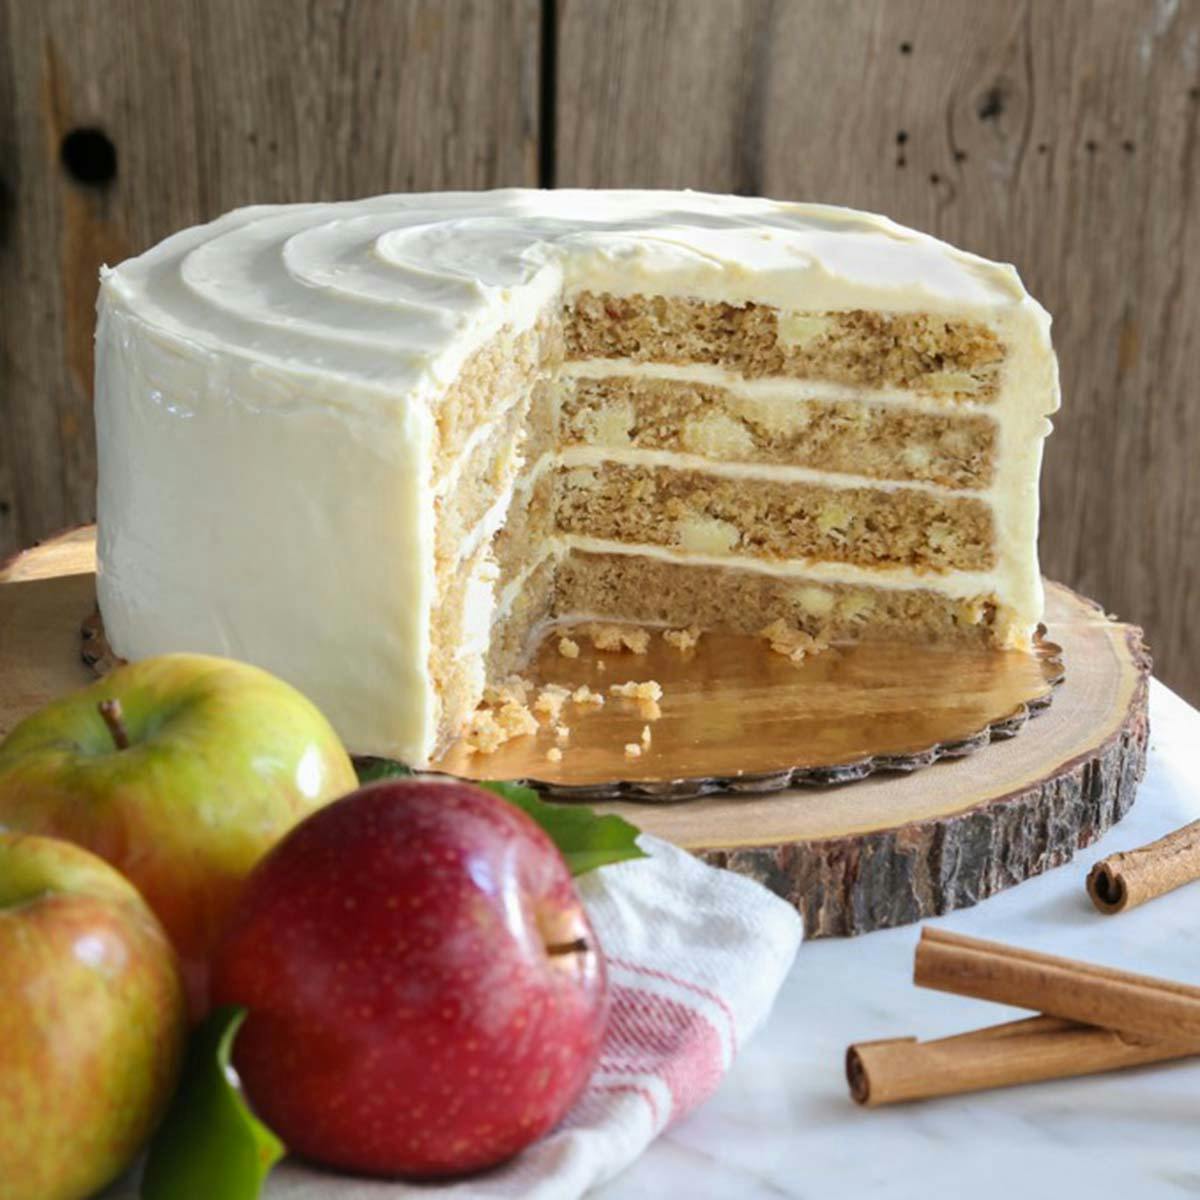 Apple Sheet Cake With Cinnamon Cream Cheese Frosting Recipe - NYT Cooking